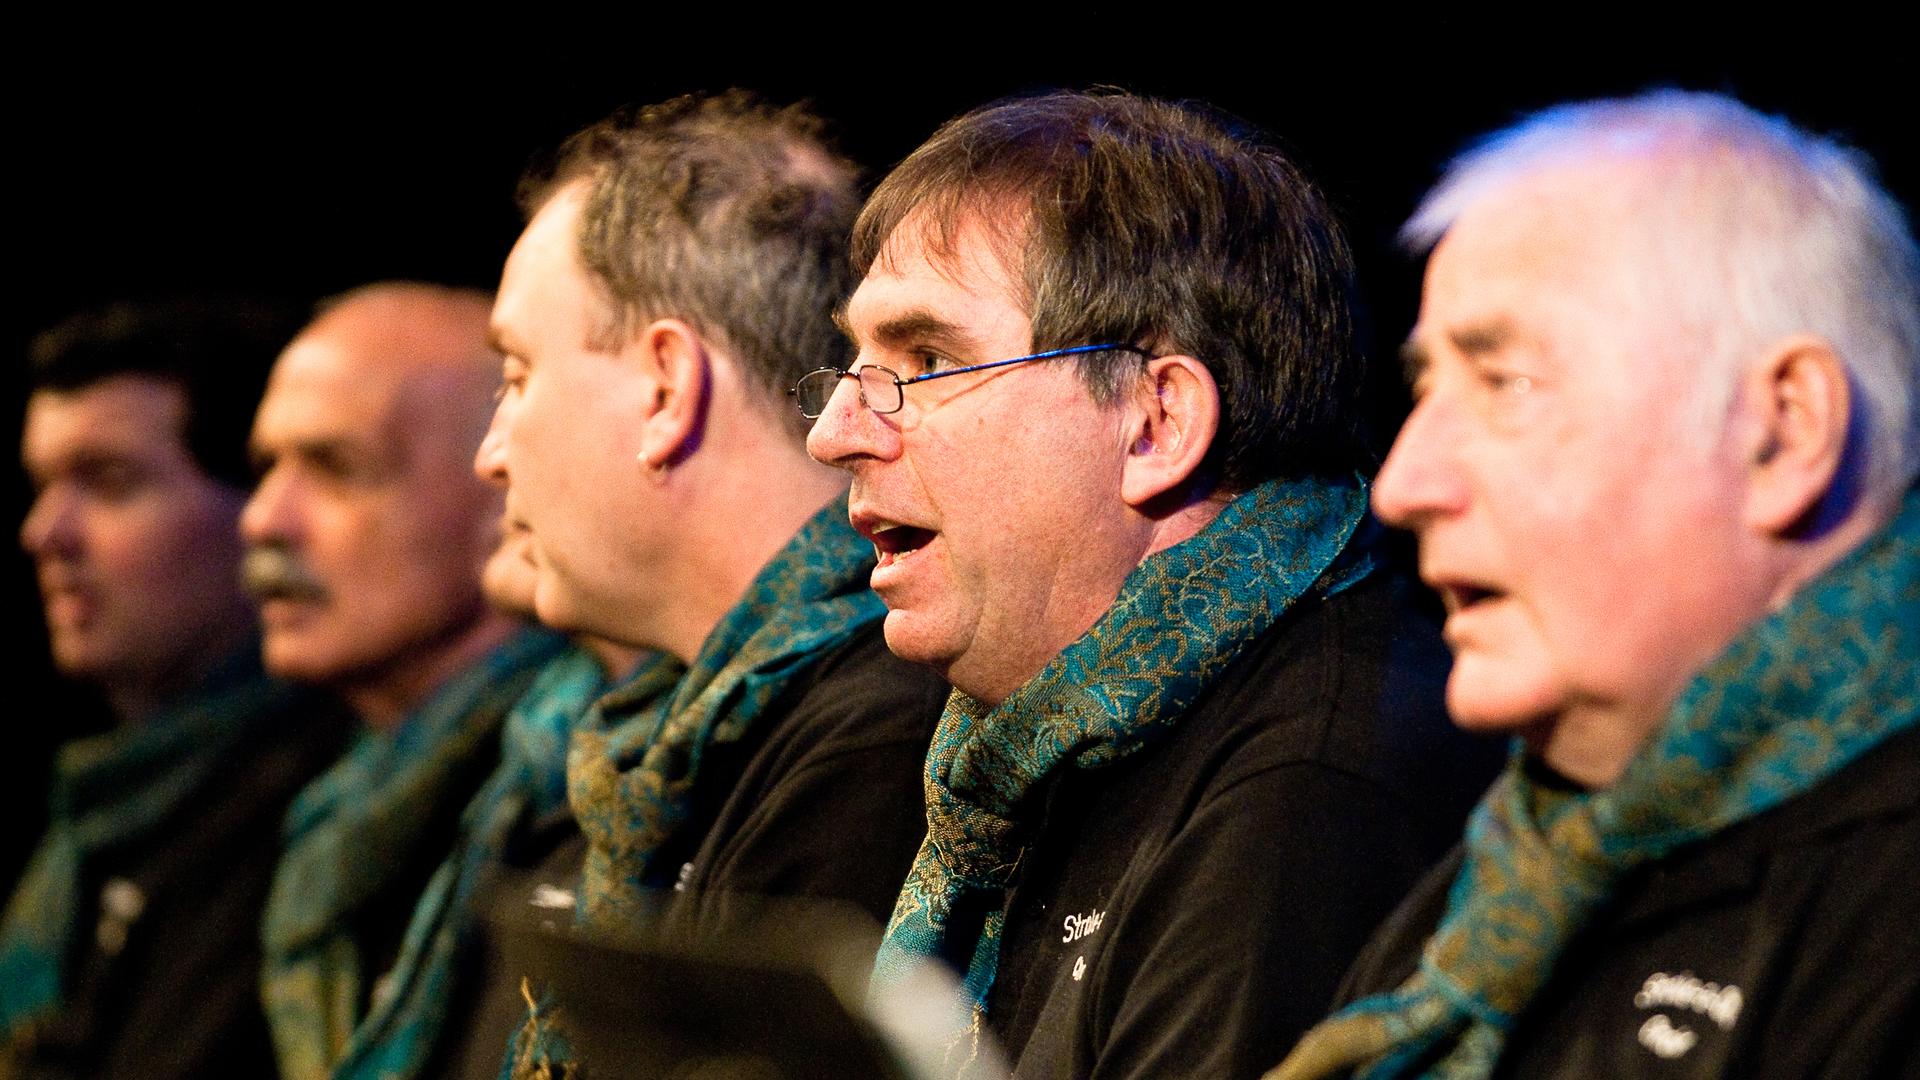 Tim Adams (center, in glasses) suffered a stroke several years ago that affected his ability to speak. But he's been singing with the Stroke a Chord choir outside of Melbourne, Australia.